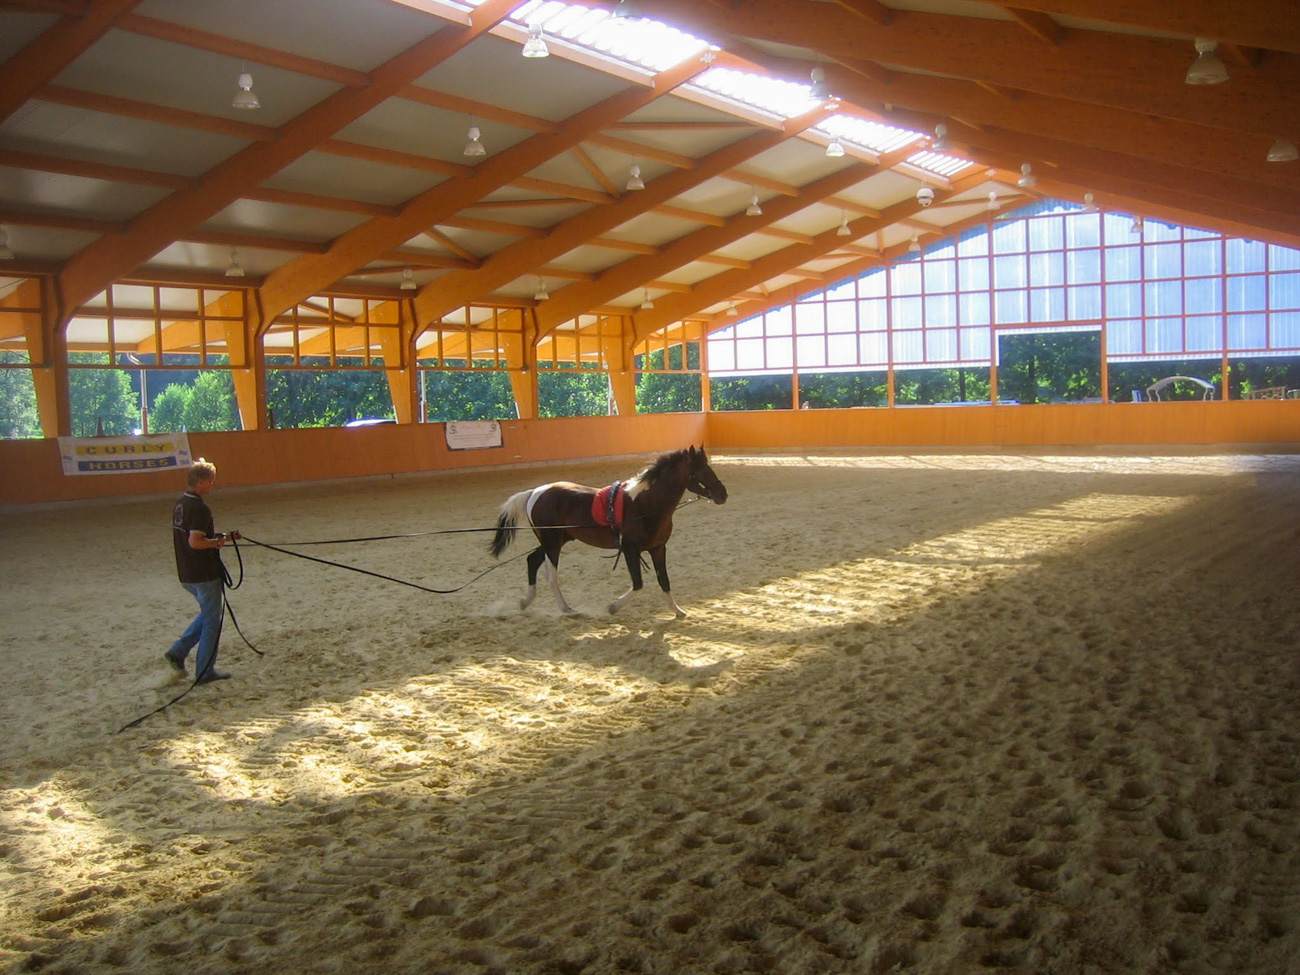 Open air arenas can reduce the concentration of horse odors in clothing after riding.